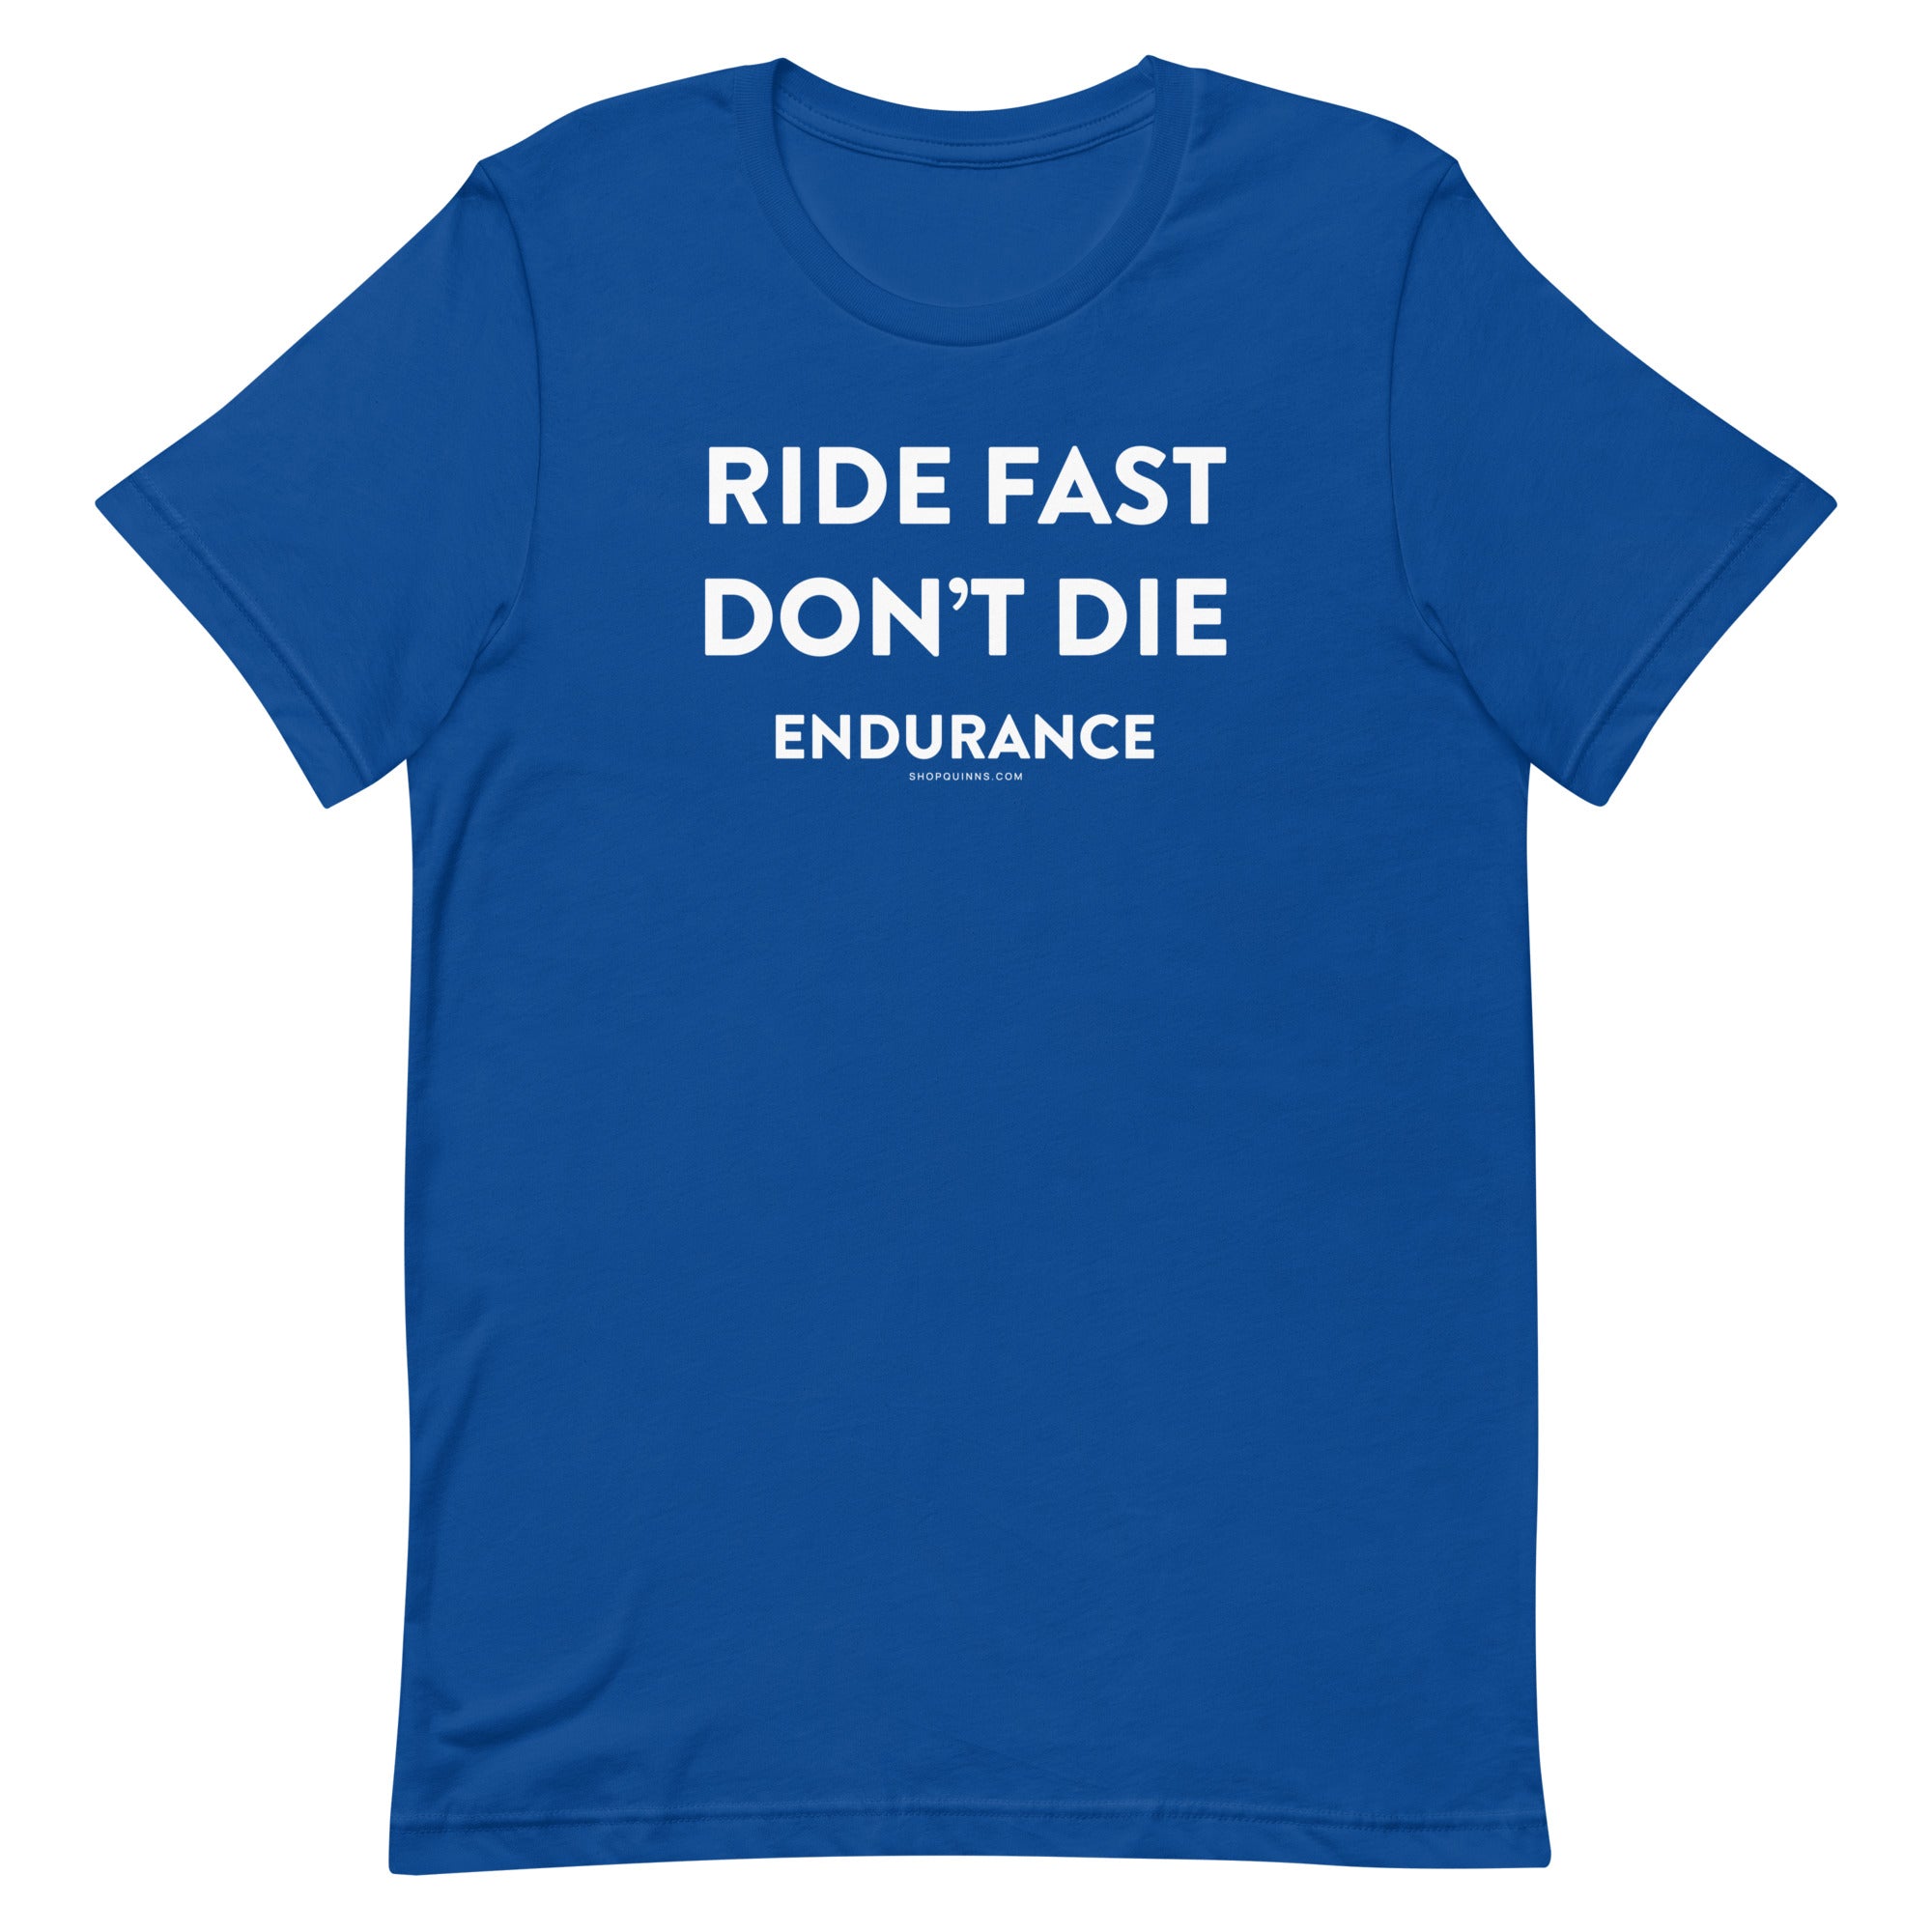 Ride Fast Don't Die Endurance Riding Graphic Tee